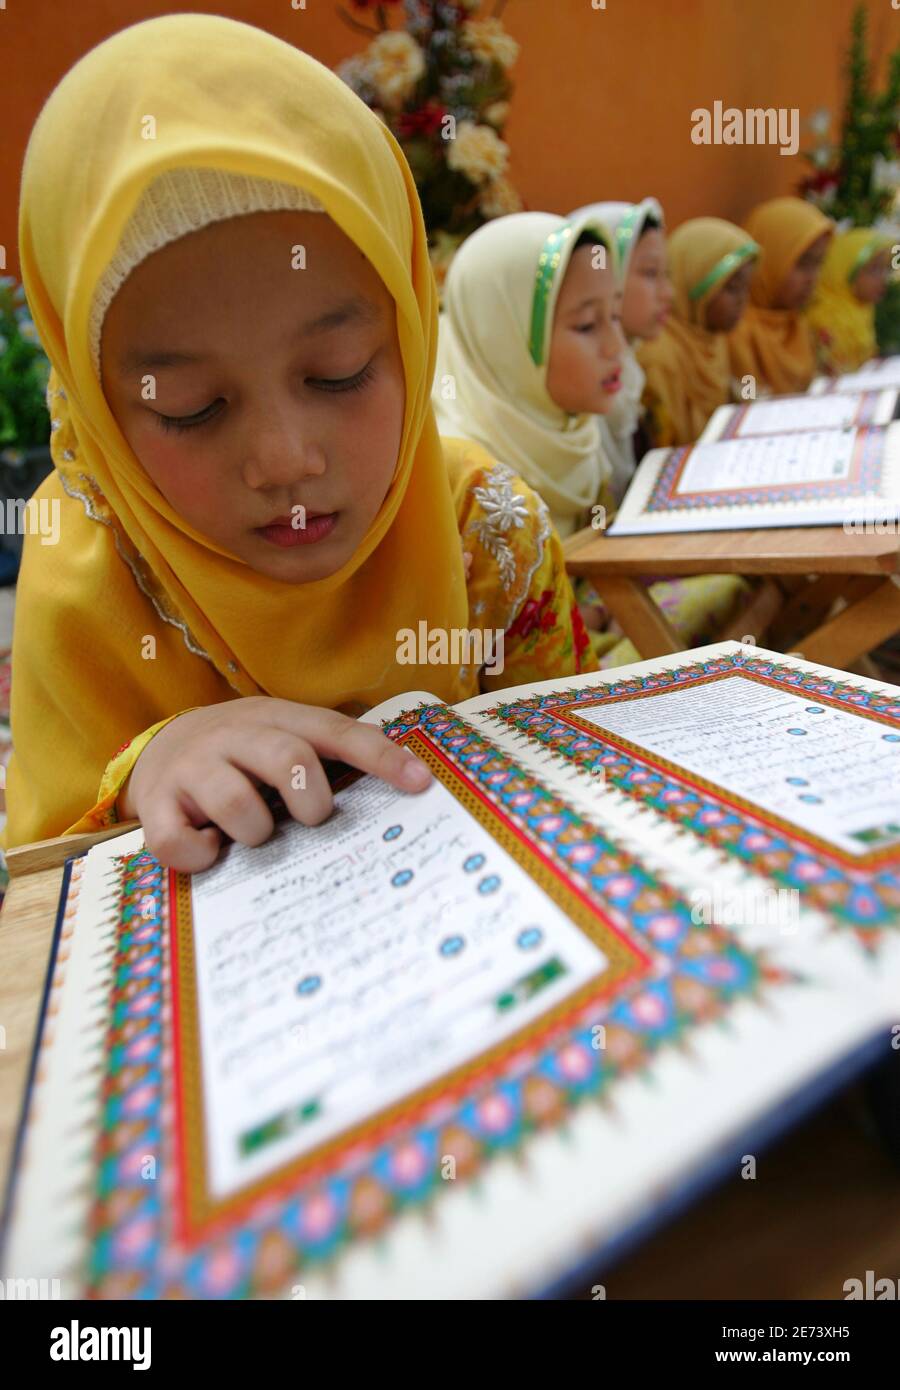 Malaysian Muslim, Wulidalhuda Fathul Muen, 7, recites the Koran during 'Tadarus al-Koran', a ceremony marking the end of a month-long Koran special recital, in Putrajaya outside Kuala Lumpur October 19, 2006. Muslims around the world celebrate Lailatul Qadar, 'the night of power predestination', which is described in the Koran as 'a night better than a thousand months'. Devotees believe Lailatul Qadar occurs in the last 10 nights of the fasting month of Ramadan, which in Malaysia began either on October 13 or 14, depending on the sighting of the upcoming new moon of Syawal.  REUTERS/Bazuki Muh Stock Photo